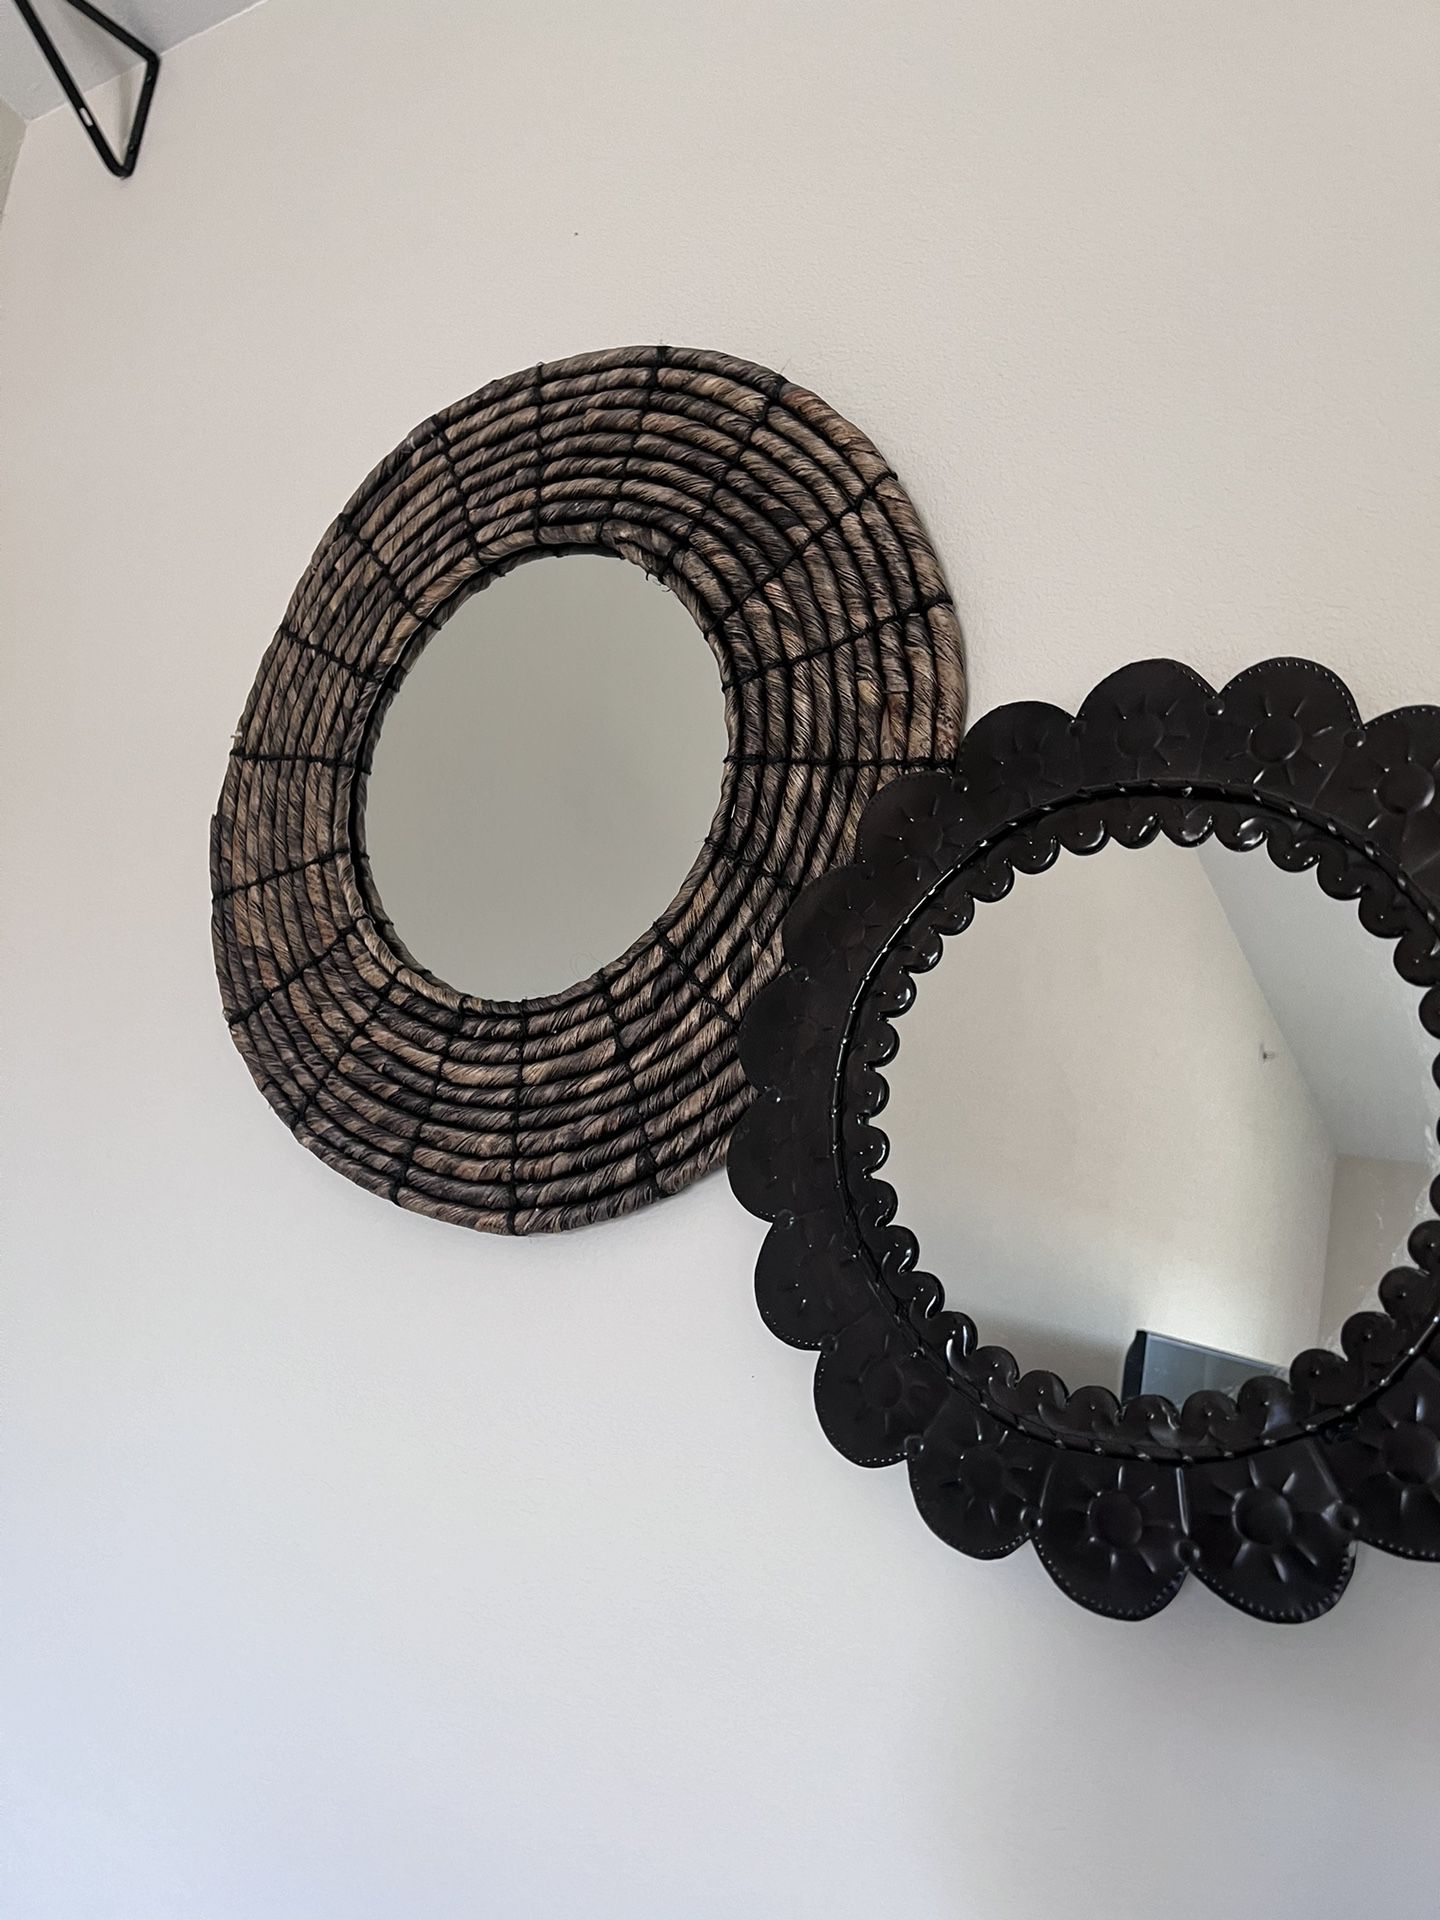 Two Round Wall Mirrors